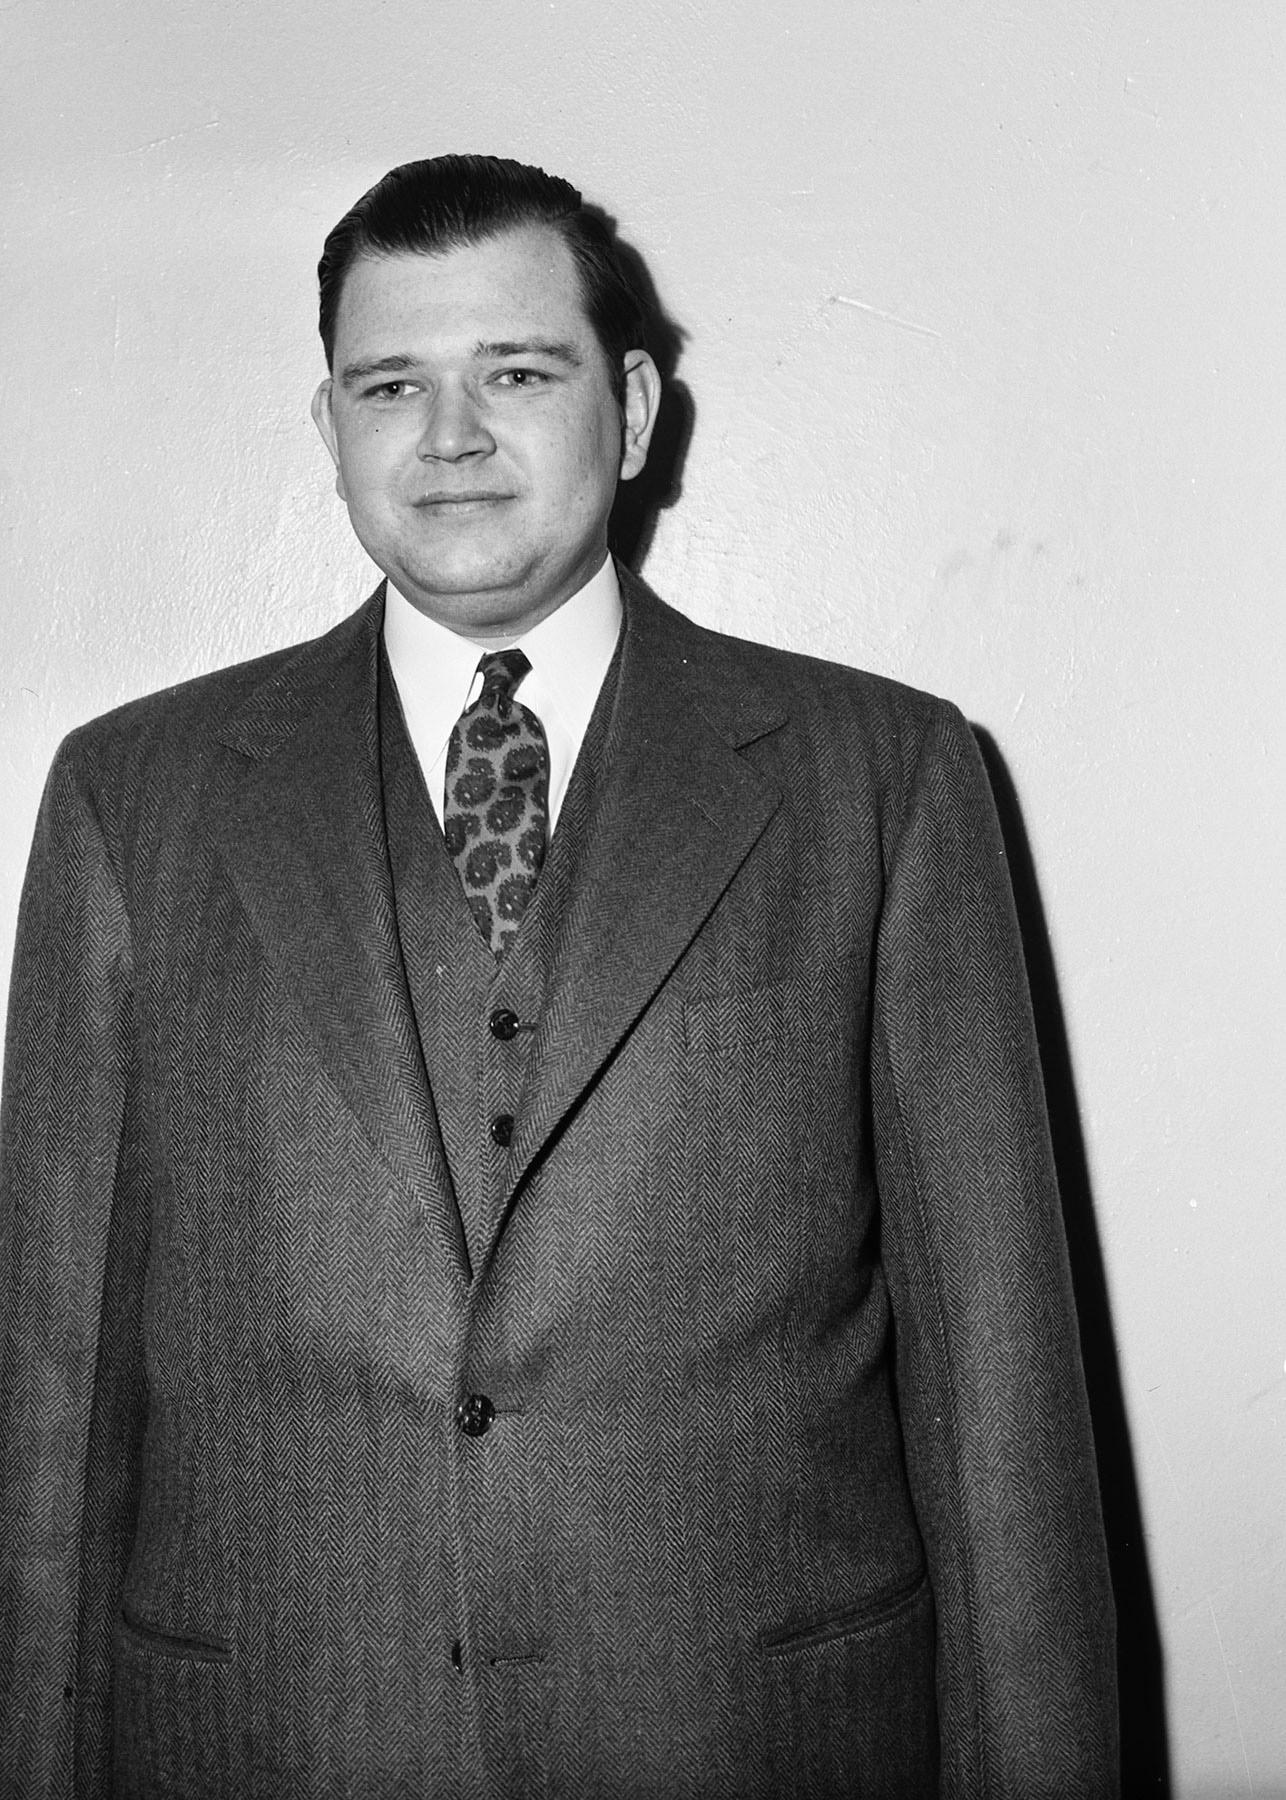 Black-and-white photo of a man in a three-piece suit.